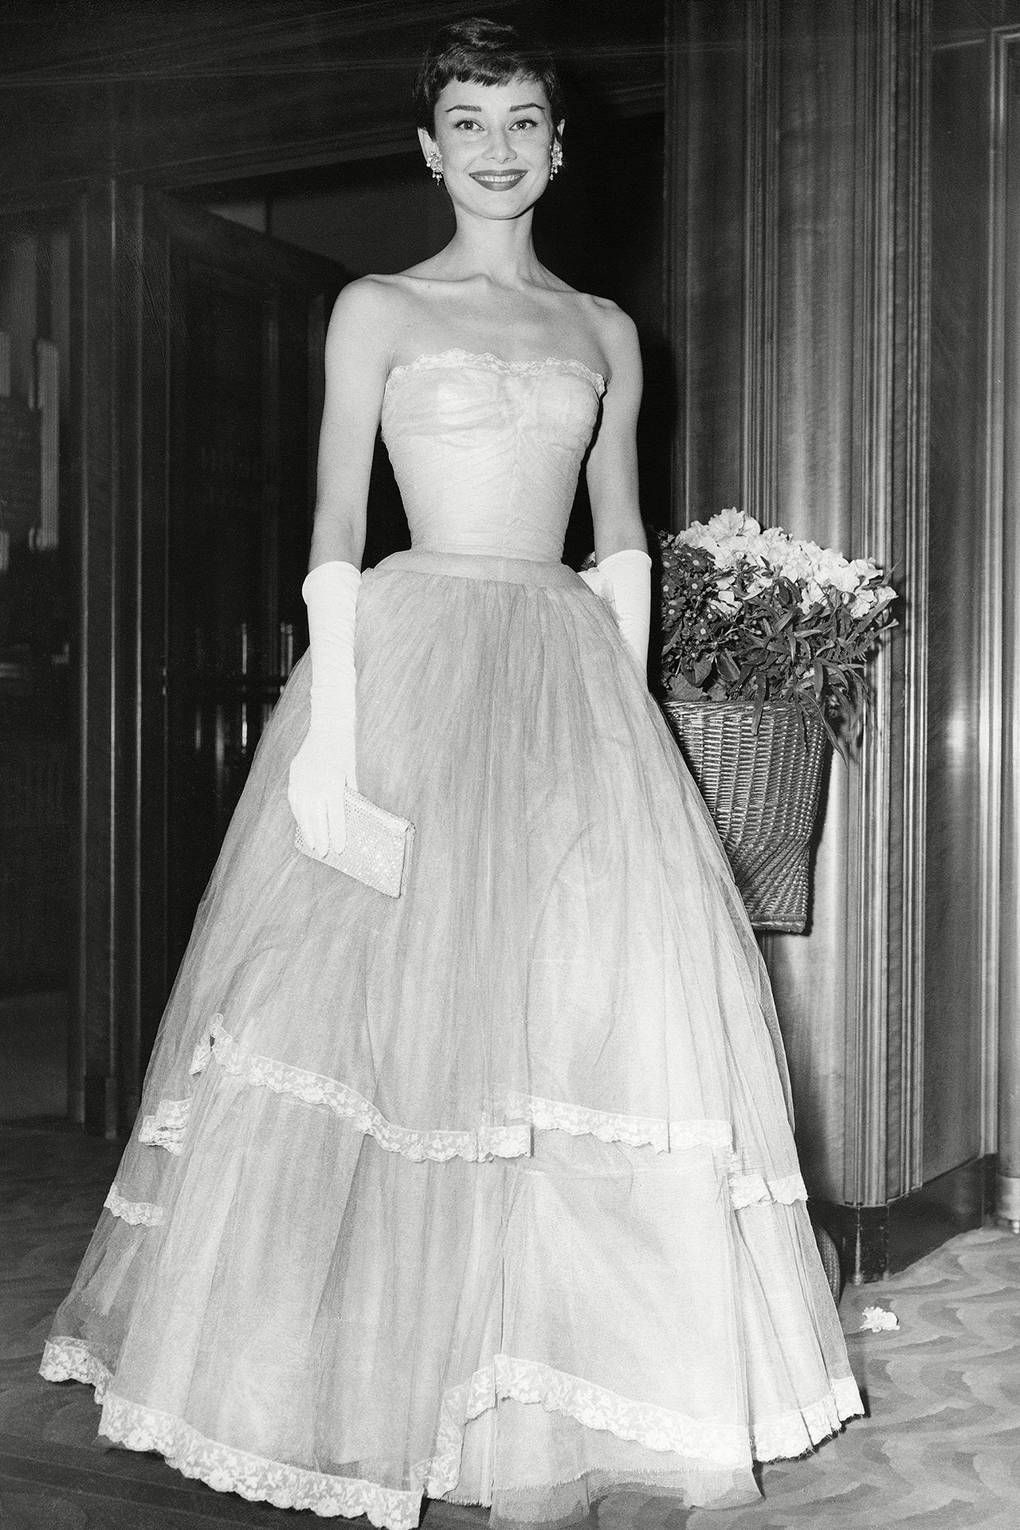 The best BAFTA dresses of all time - The best BAFTA dresses of all time -   18 style Icons audrey hepburn ideas